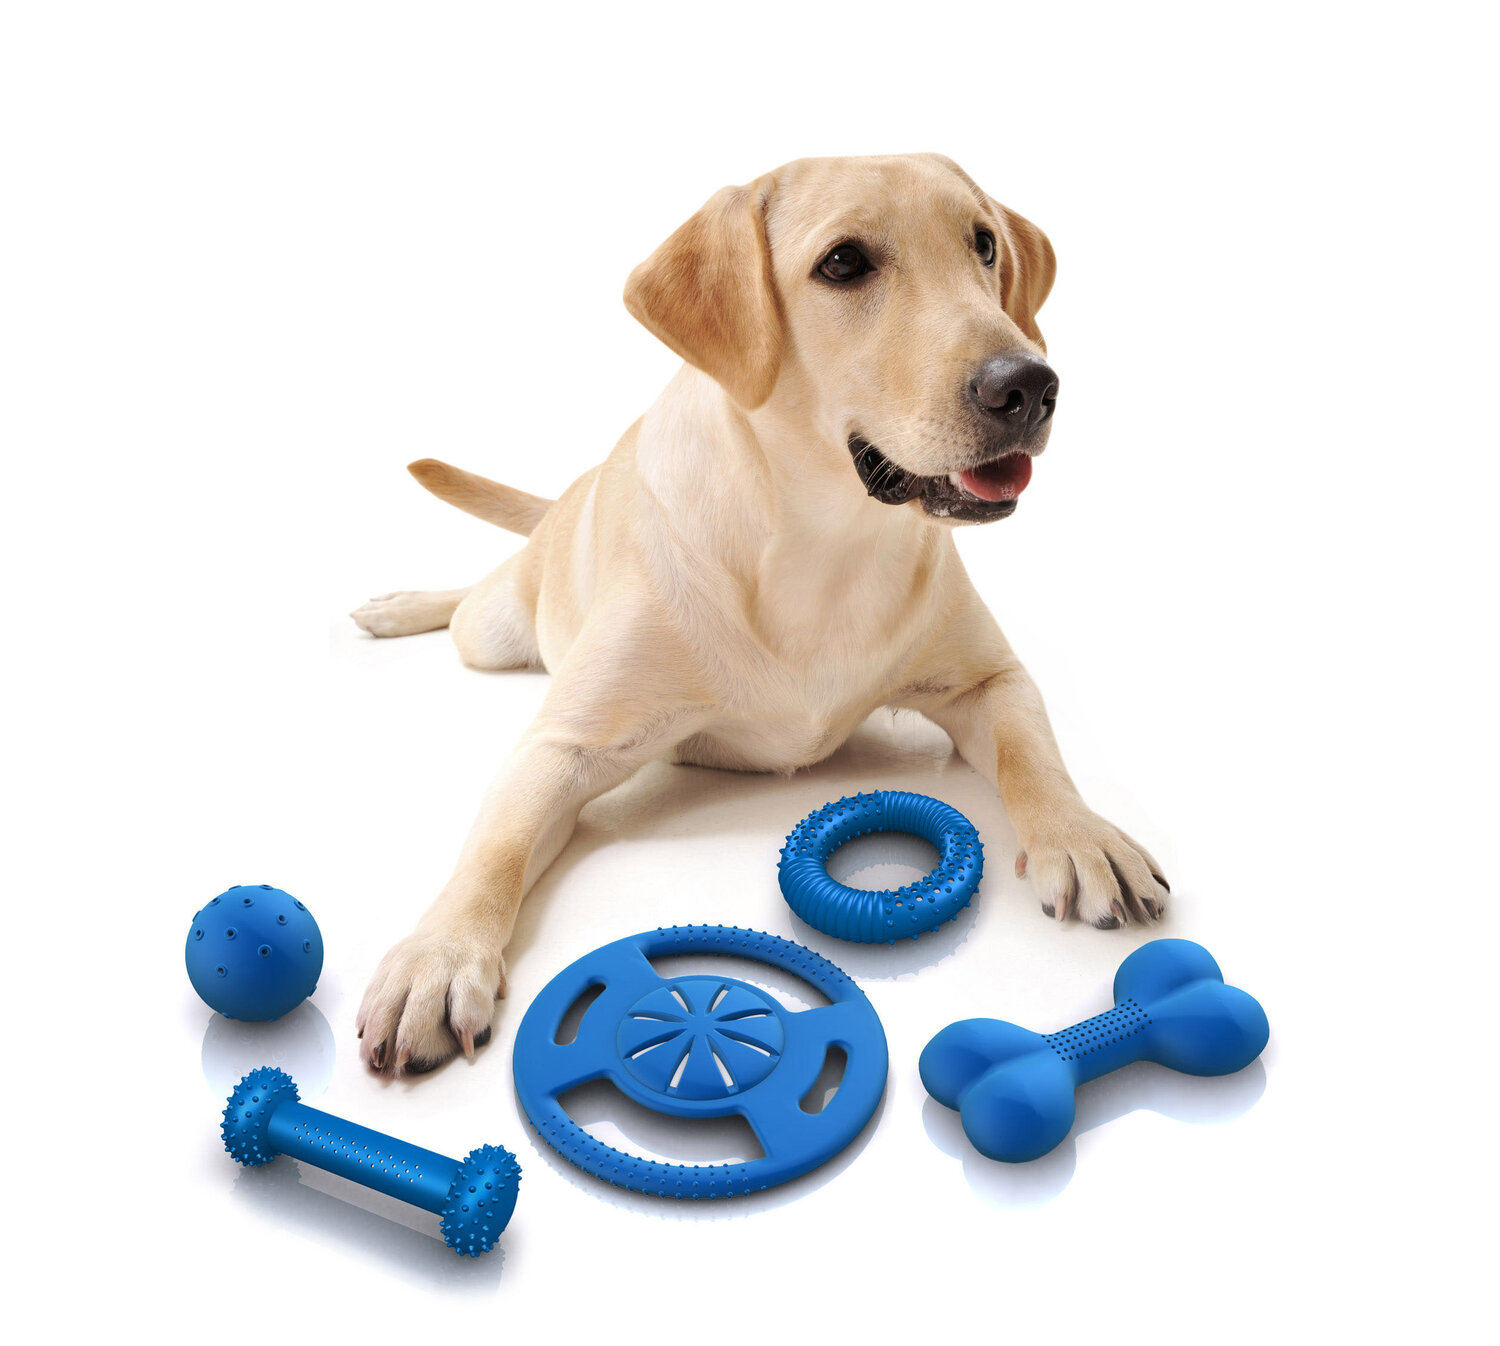 Choosing the Right Dog Toy: A Guide for Pet Parents